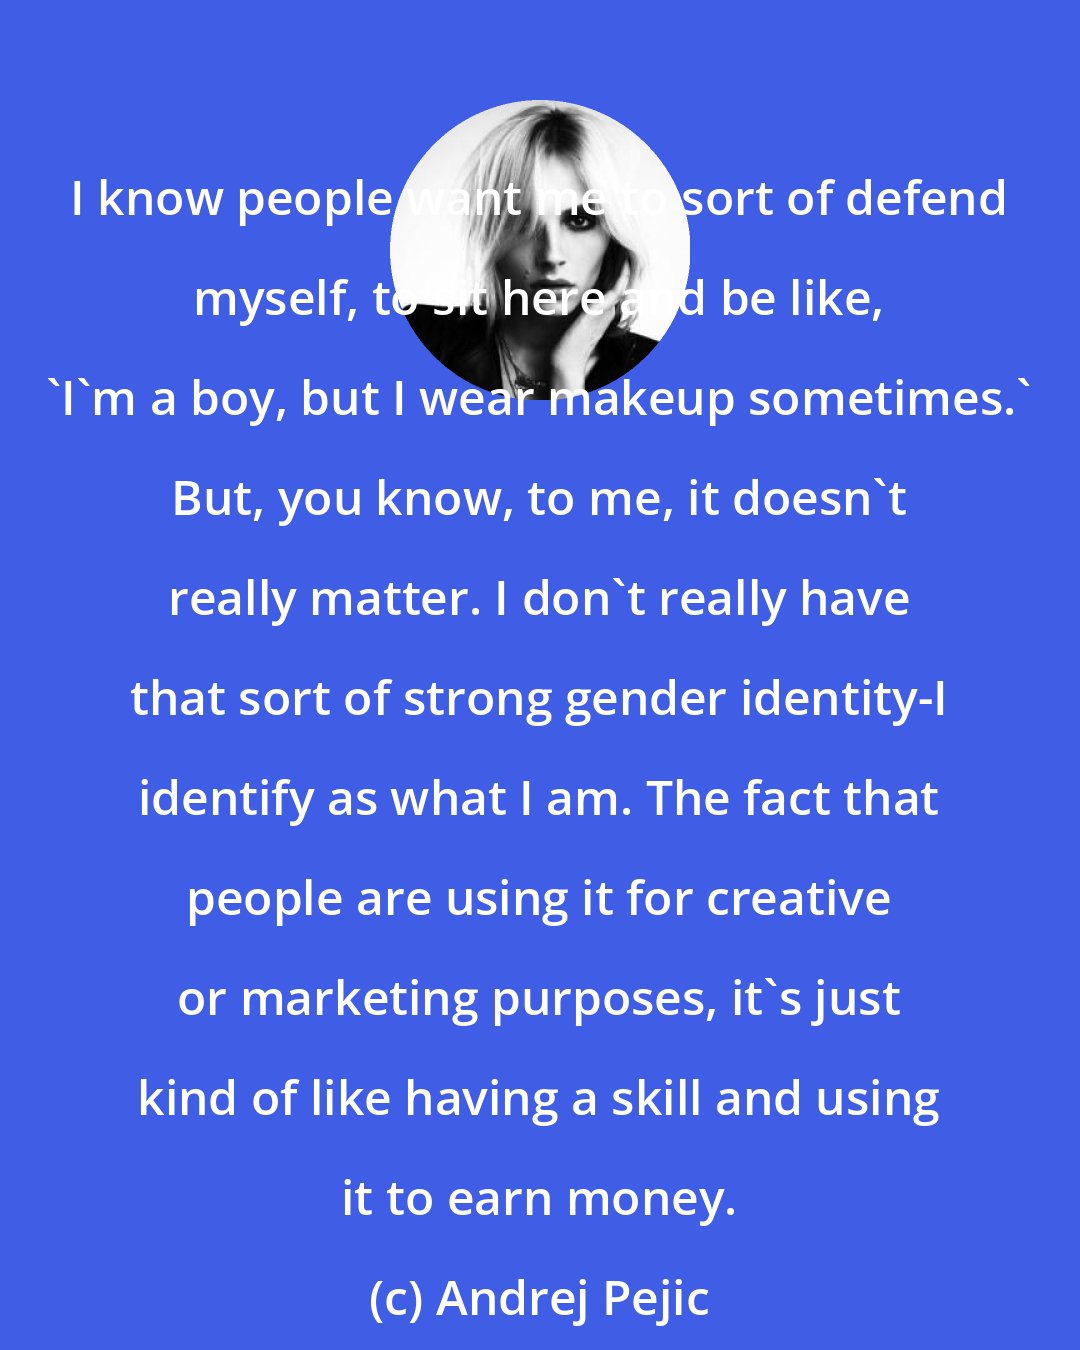 Andrej Pejic: I know people want me to sort of defend myself, to sit here and be like, 'I'm a boy, but I wear makeup sometimes.' But, you know, to me, it doesn't really matter. I don't really have that sort of strong gender identity-I identify as what I am. The fact that people are using it for creative or marketing purposes, it's just kind of like having a skill and using it to earn money.